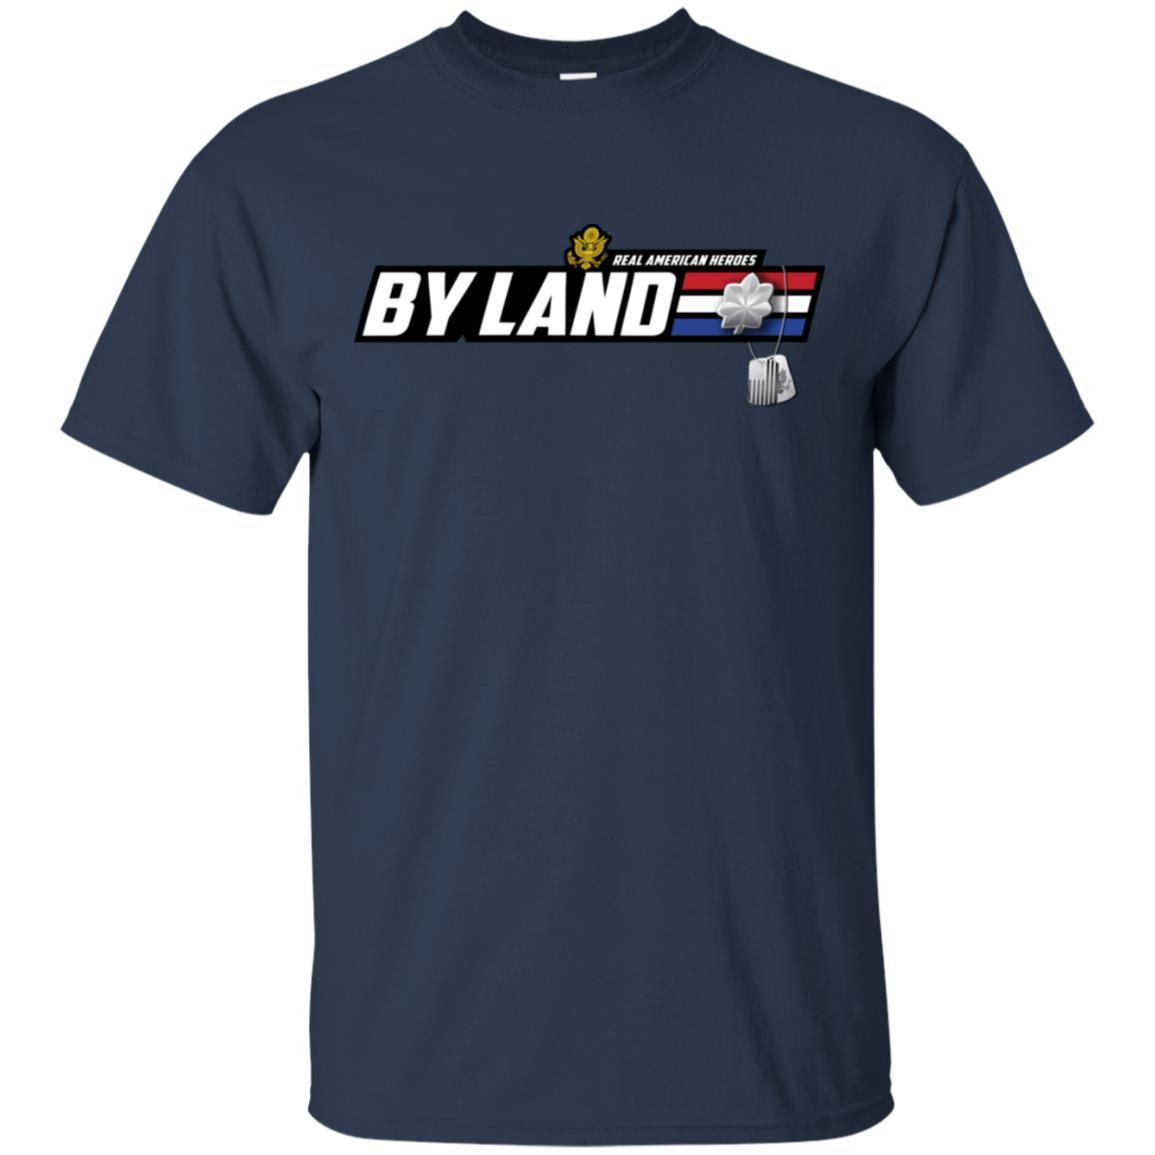 US Army T-Shirt "Real American Heroes By Land" O-5 Lieutenant Colonel(LTC) On Front-TShirt-Army-Veterans Nation